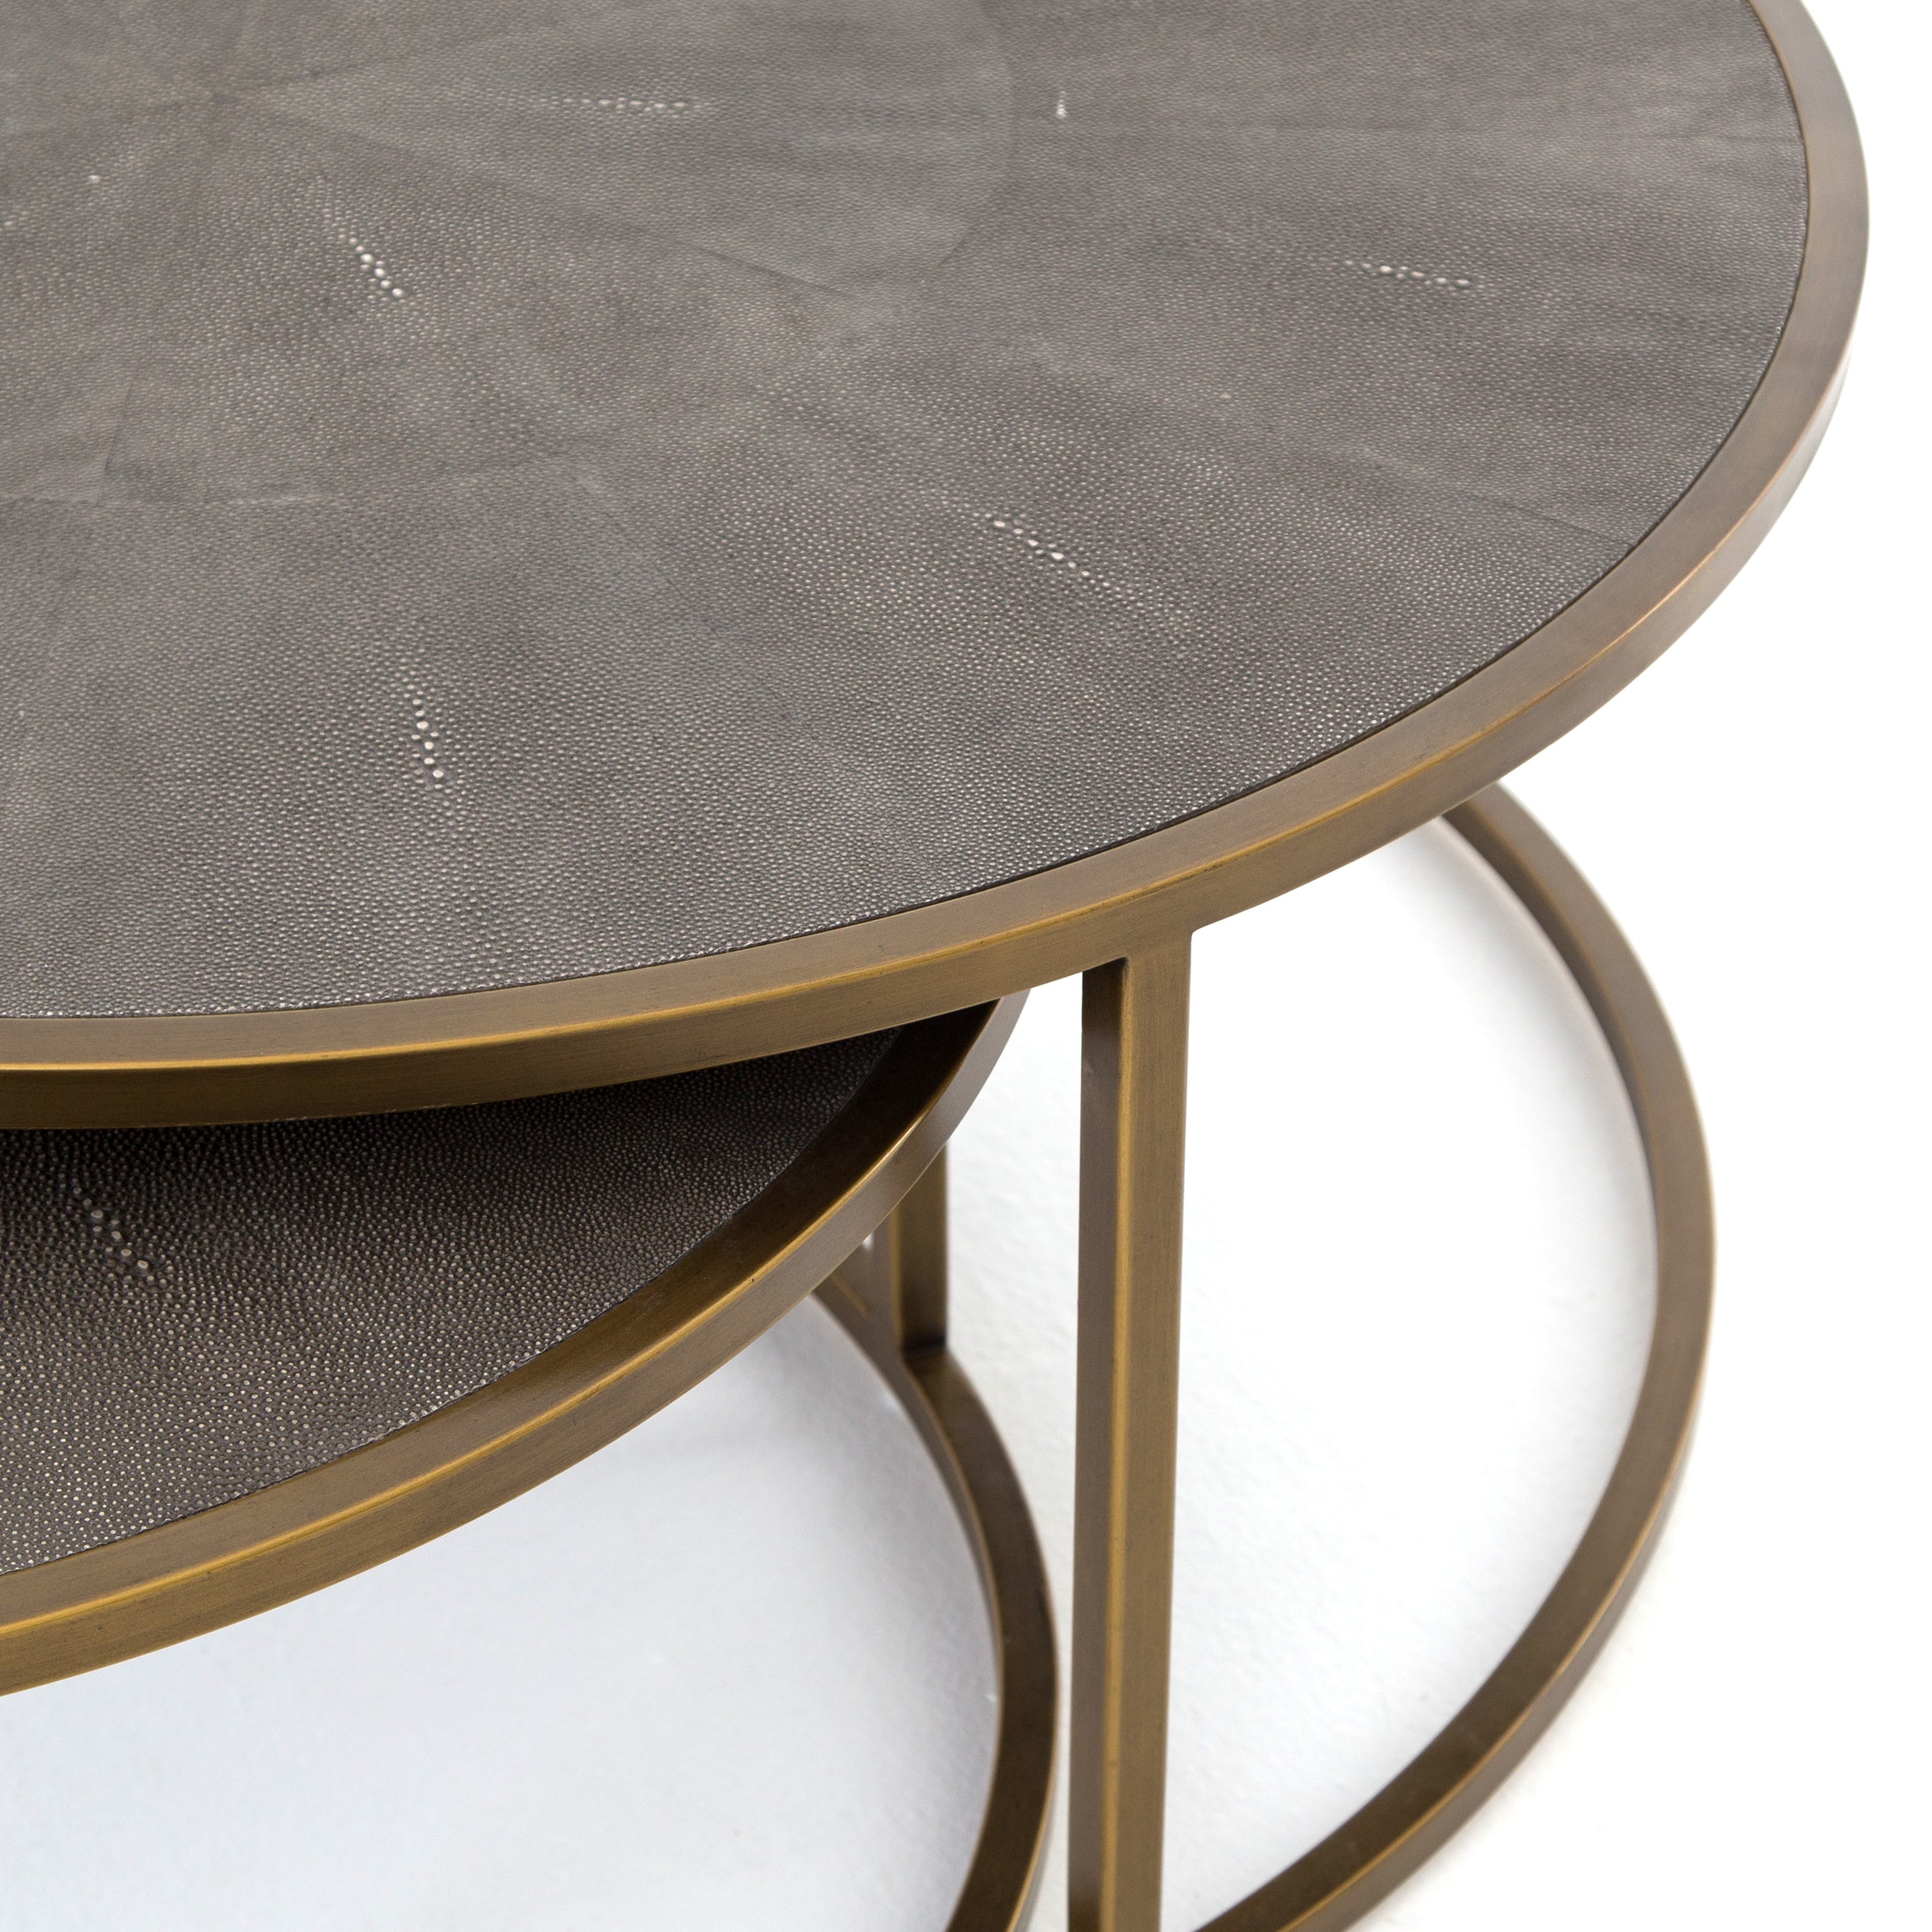 Antique brass-finished iron curves like a crescent to welcome a nesting option for its smaller-scaled companion table with this Shagreen Nesting Coffee Table - Grey. A resin faux shagreen table top in grey lends rich texture to clean, modern lines for any living room or lounge area.   Large Table Dims: 38"w x 38"d x 16"h Small Table Dims: 30"w x 30"d x 14"h Overall Dimensions: 38.00"w x 38.00"d x 16.00"h